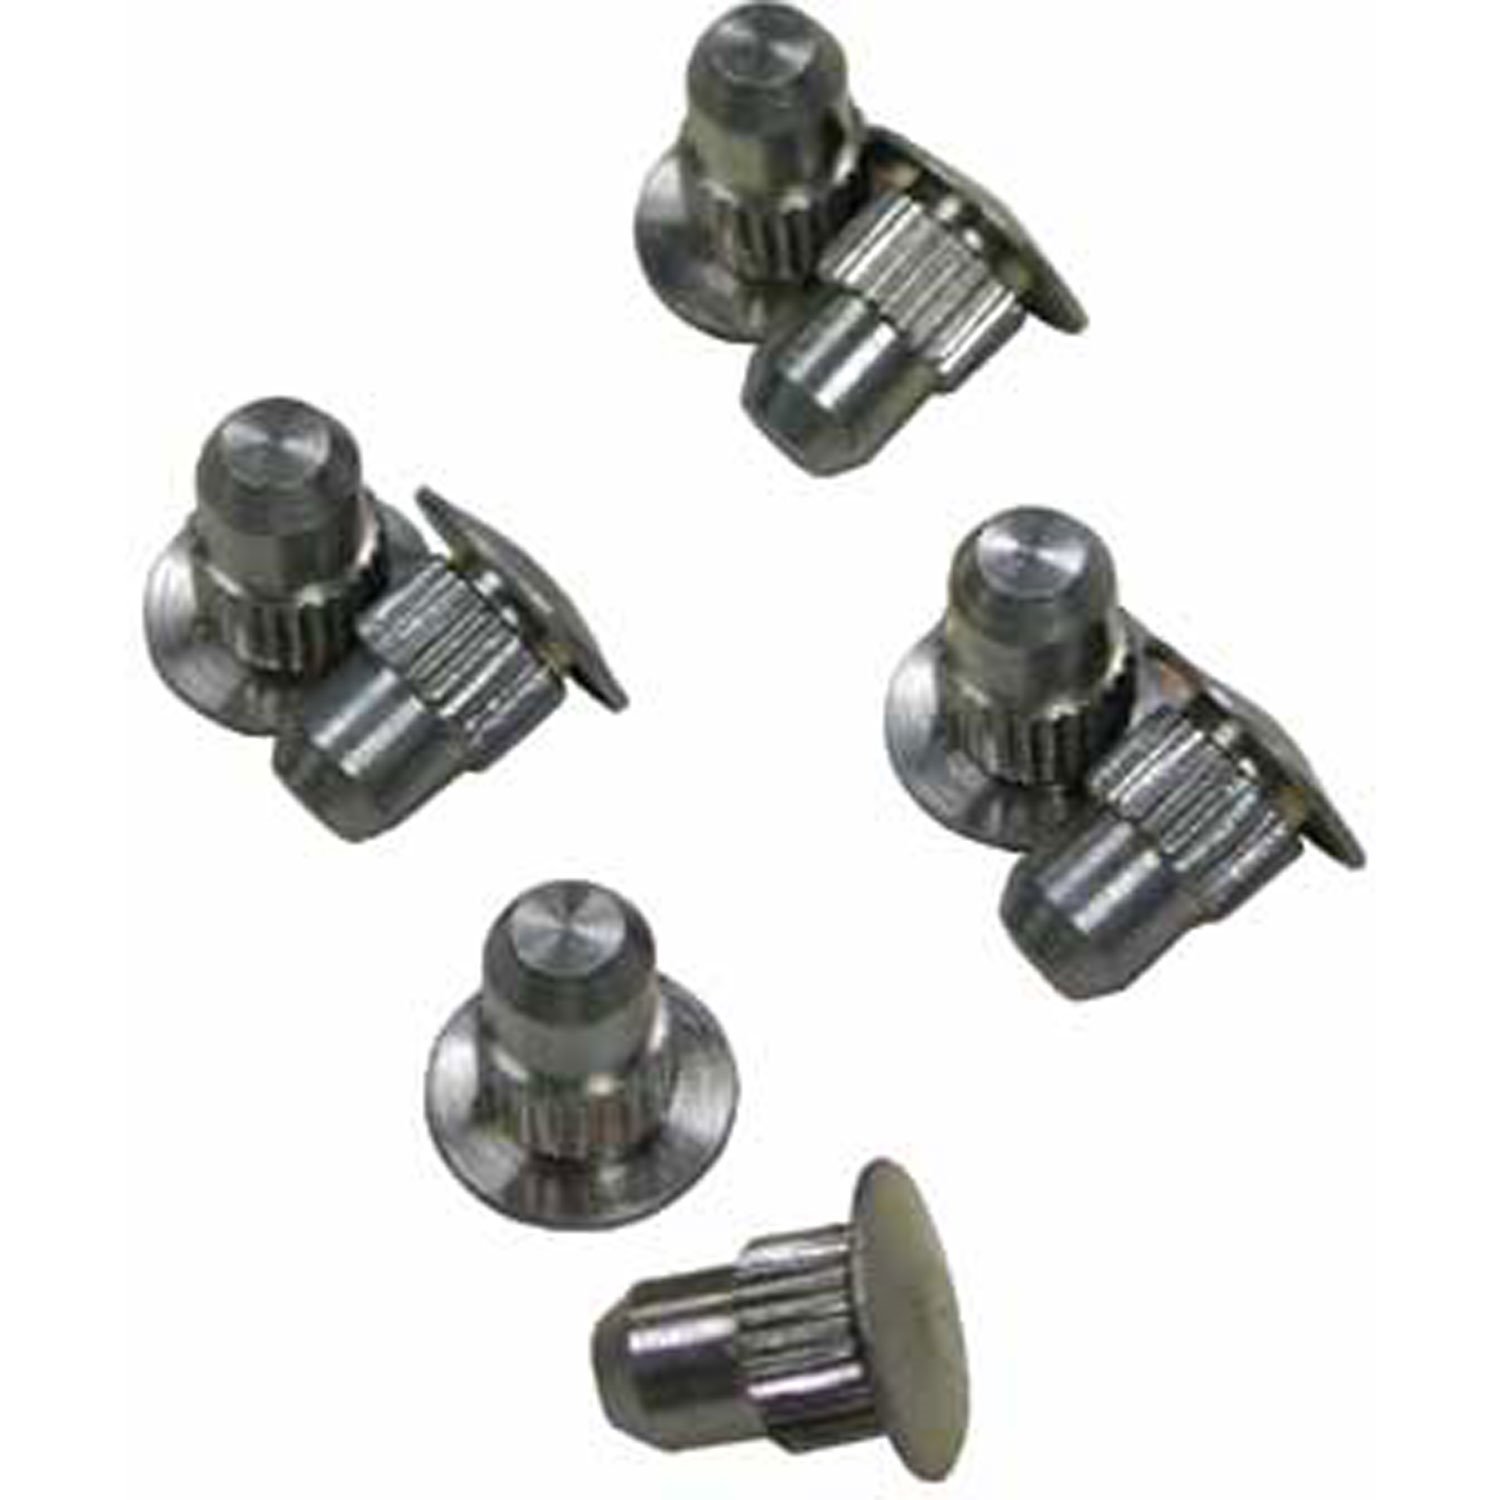 Alignment Cams Guide Pins for GM 1500/2500 Pickup